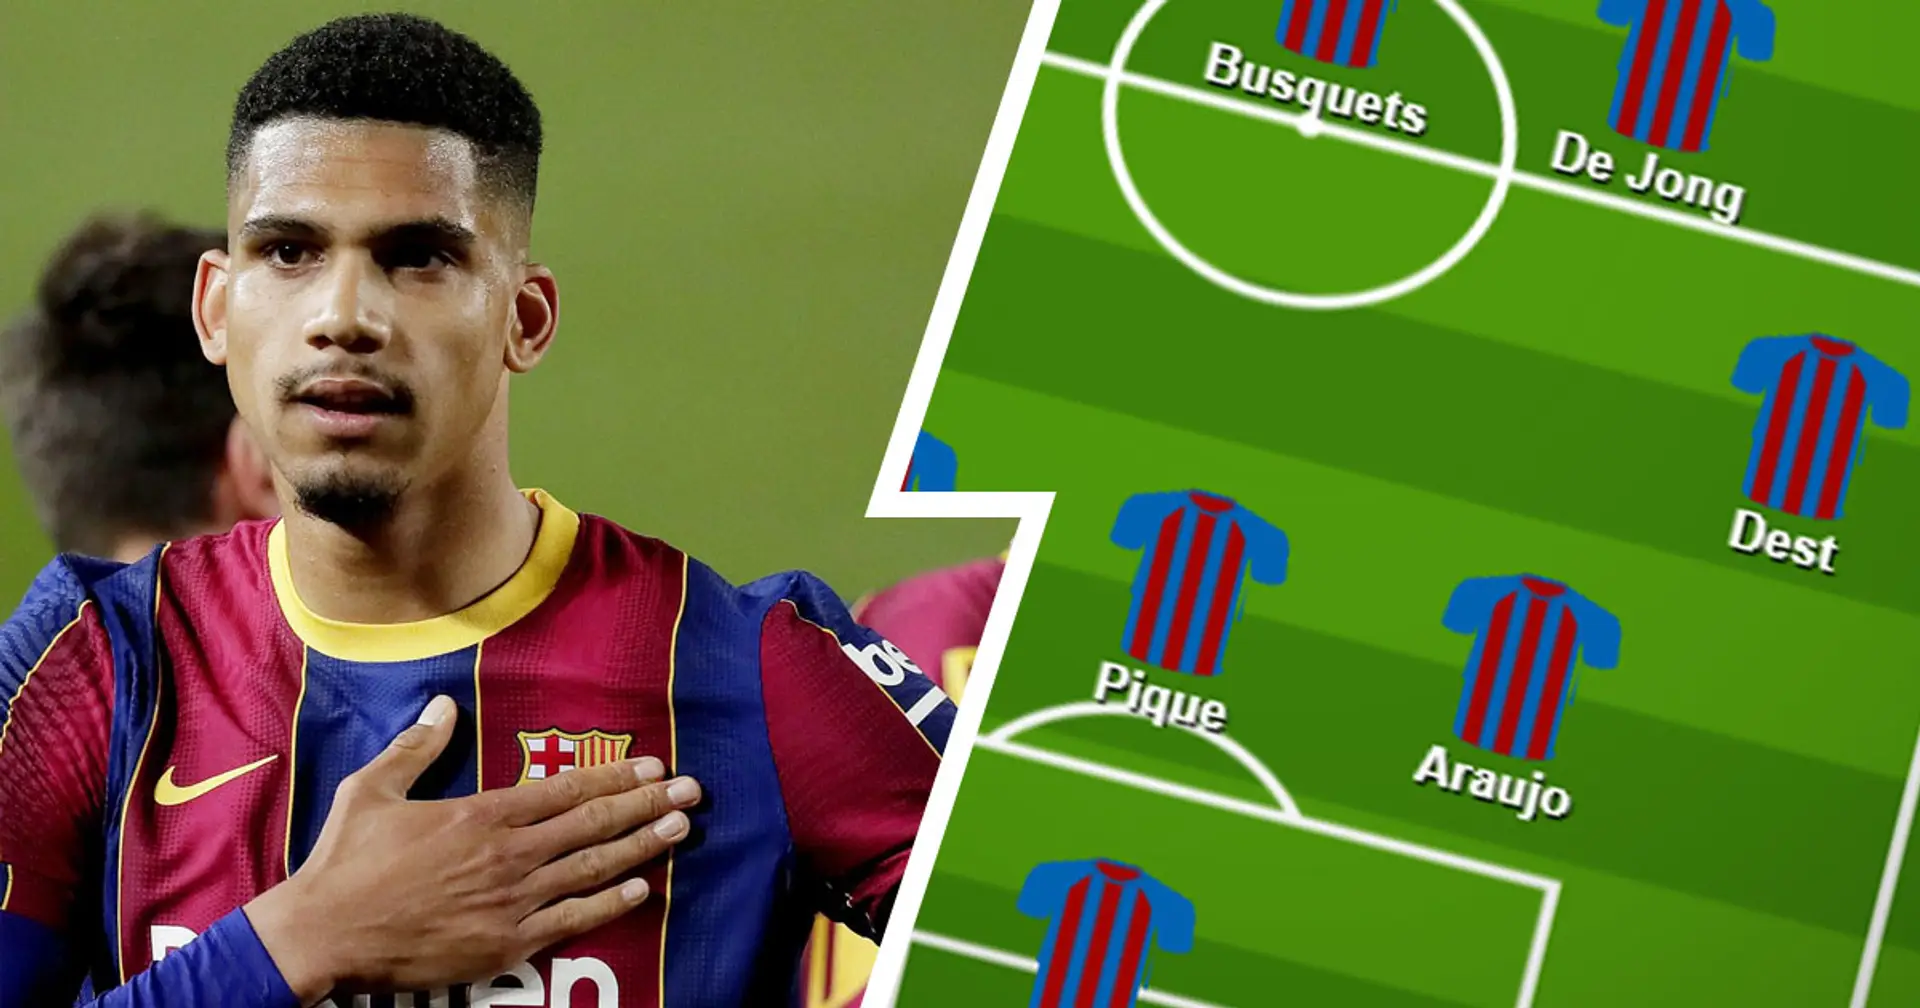 Lenglet out, Araujo in: Barca's potential XI for Villarreal based on Getafe win